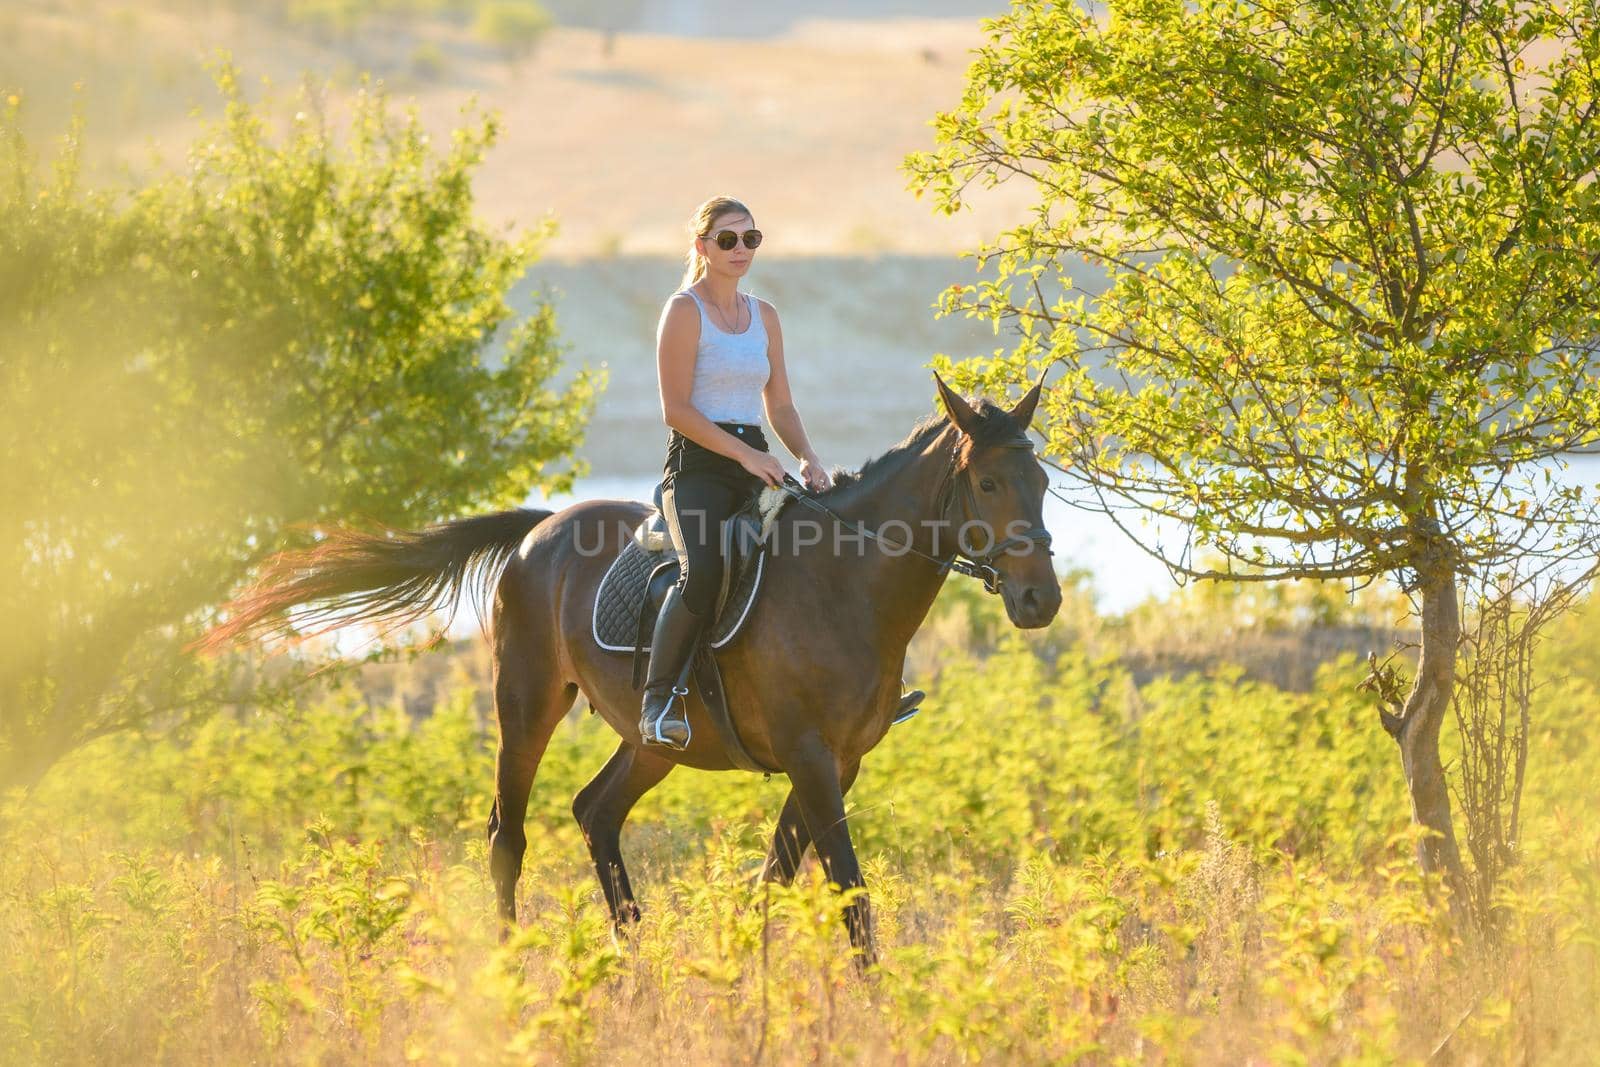 A girl rides a horse on a warm autumn day